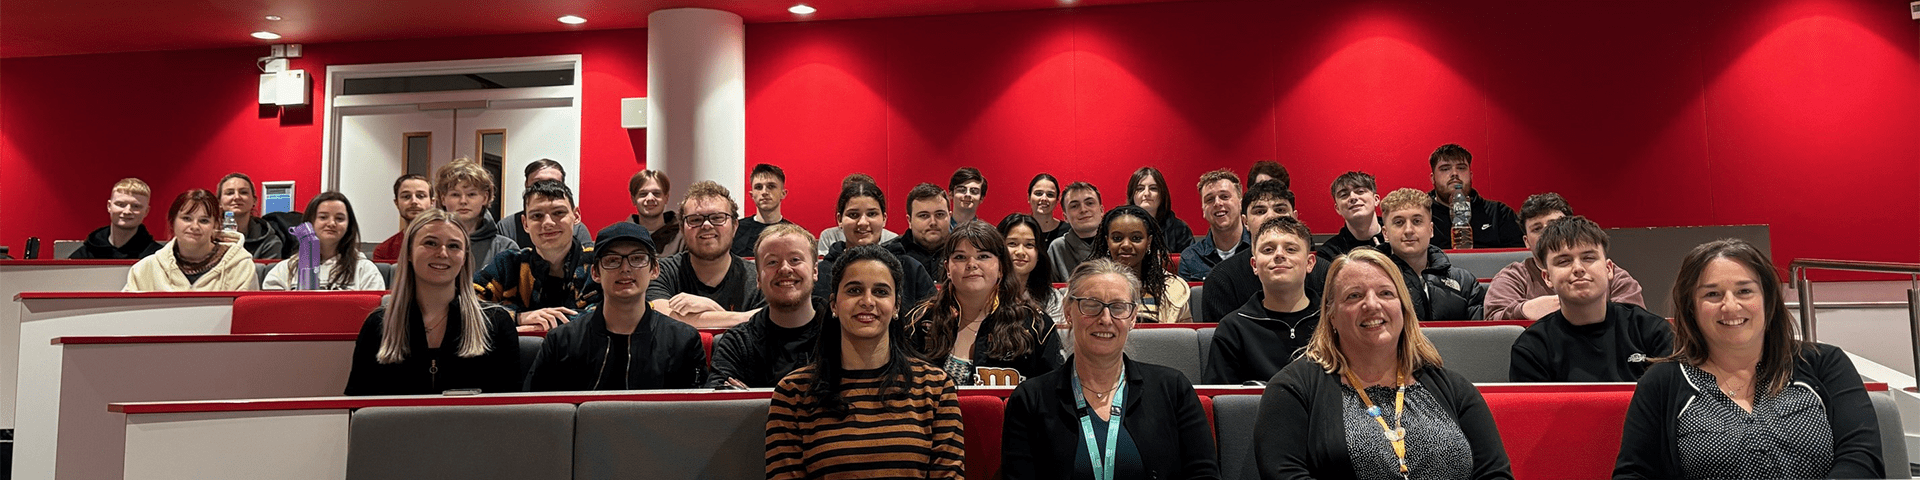 Students and staff in the Palmerston Lecture Theatre at Solent University.